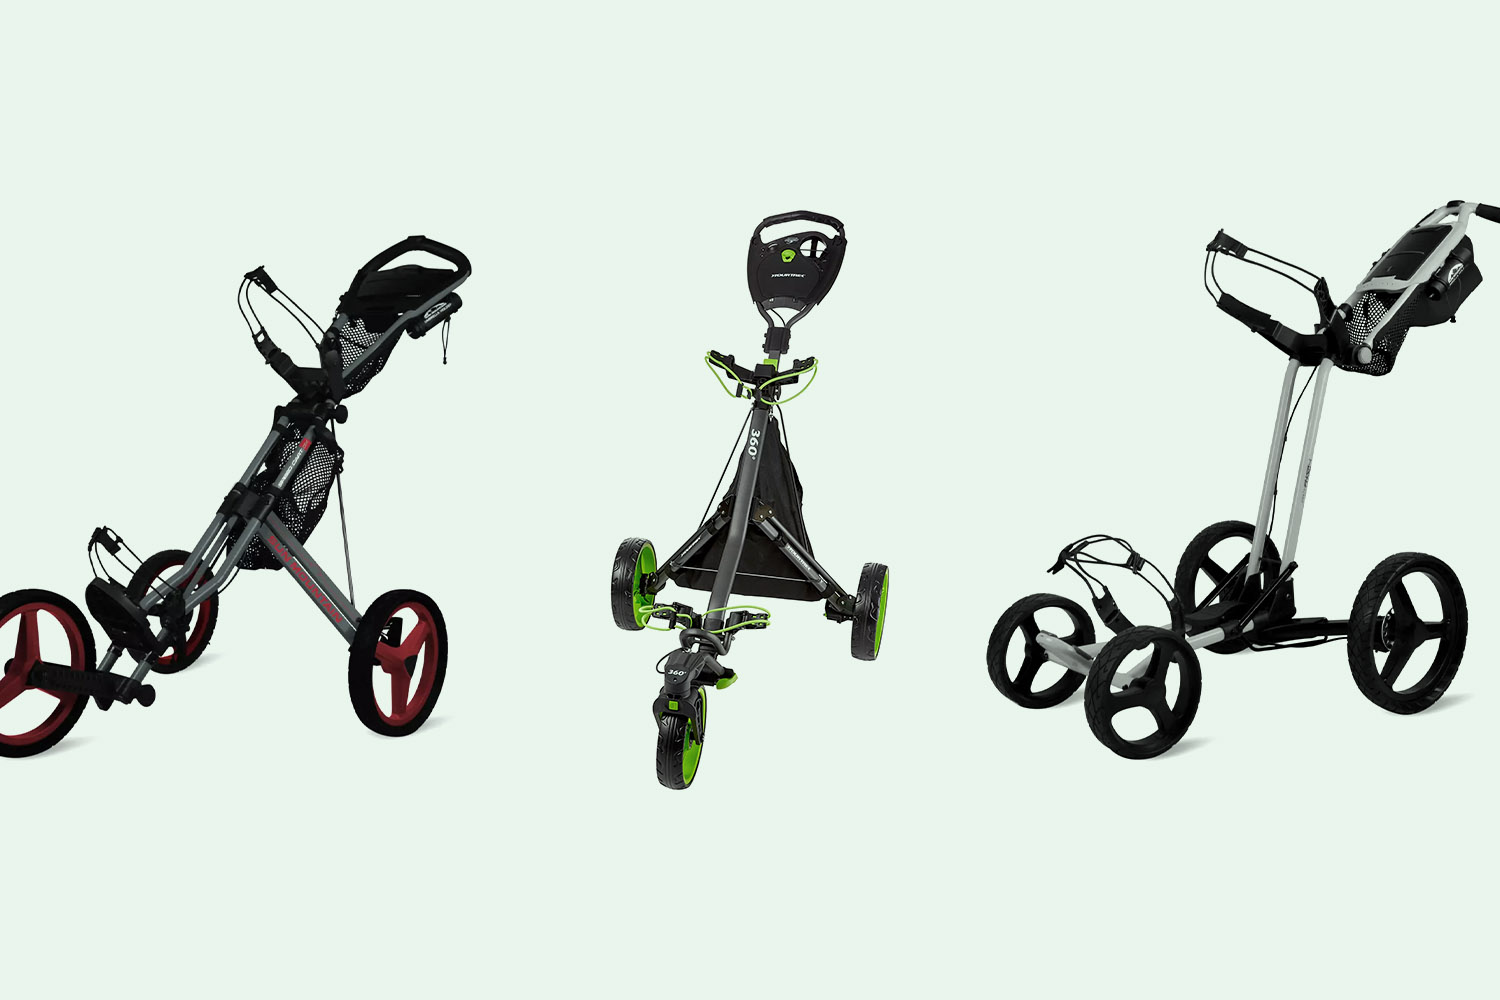 Attention Golfers: These Push Carts Are in Stock for the First Time Since Quarantine Started